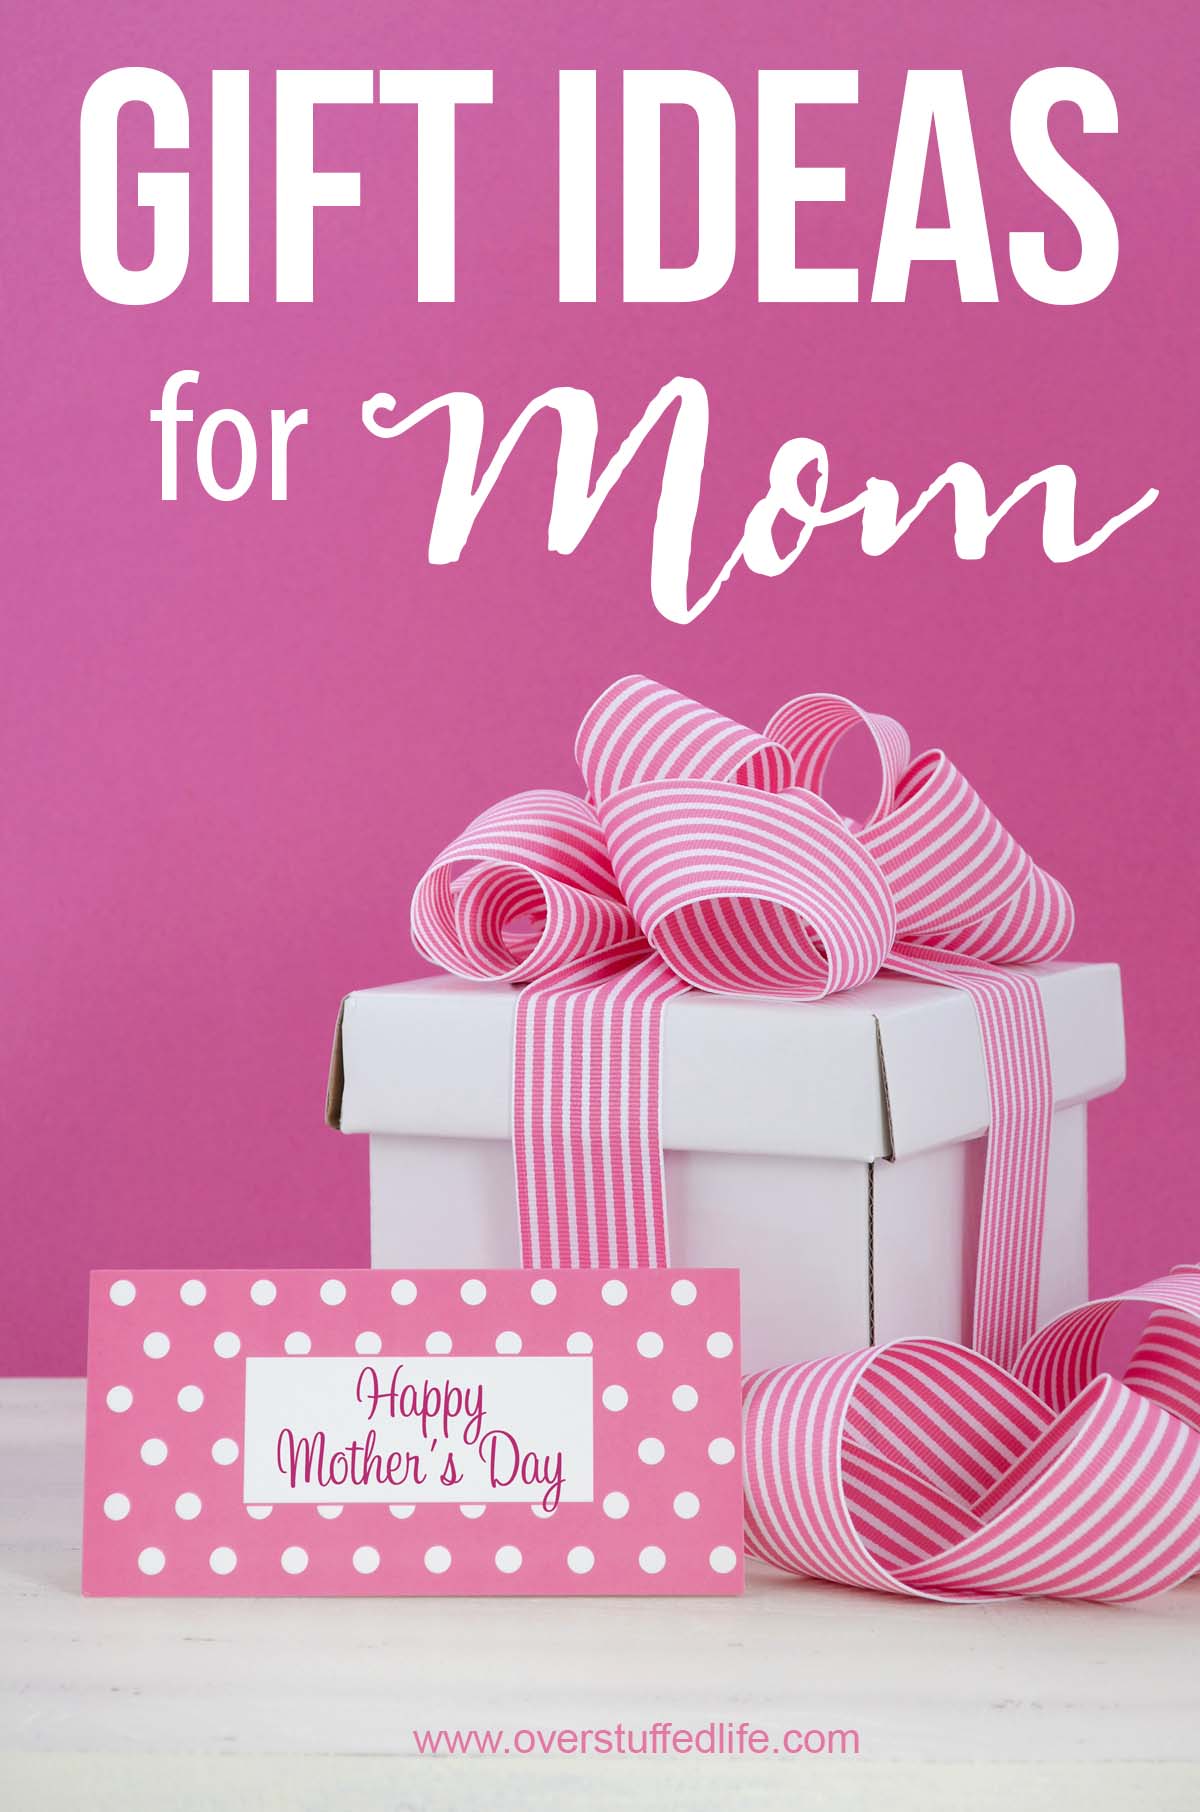 Gifts for Moms - The Ultimate Guide